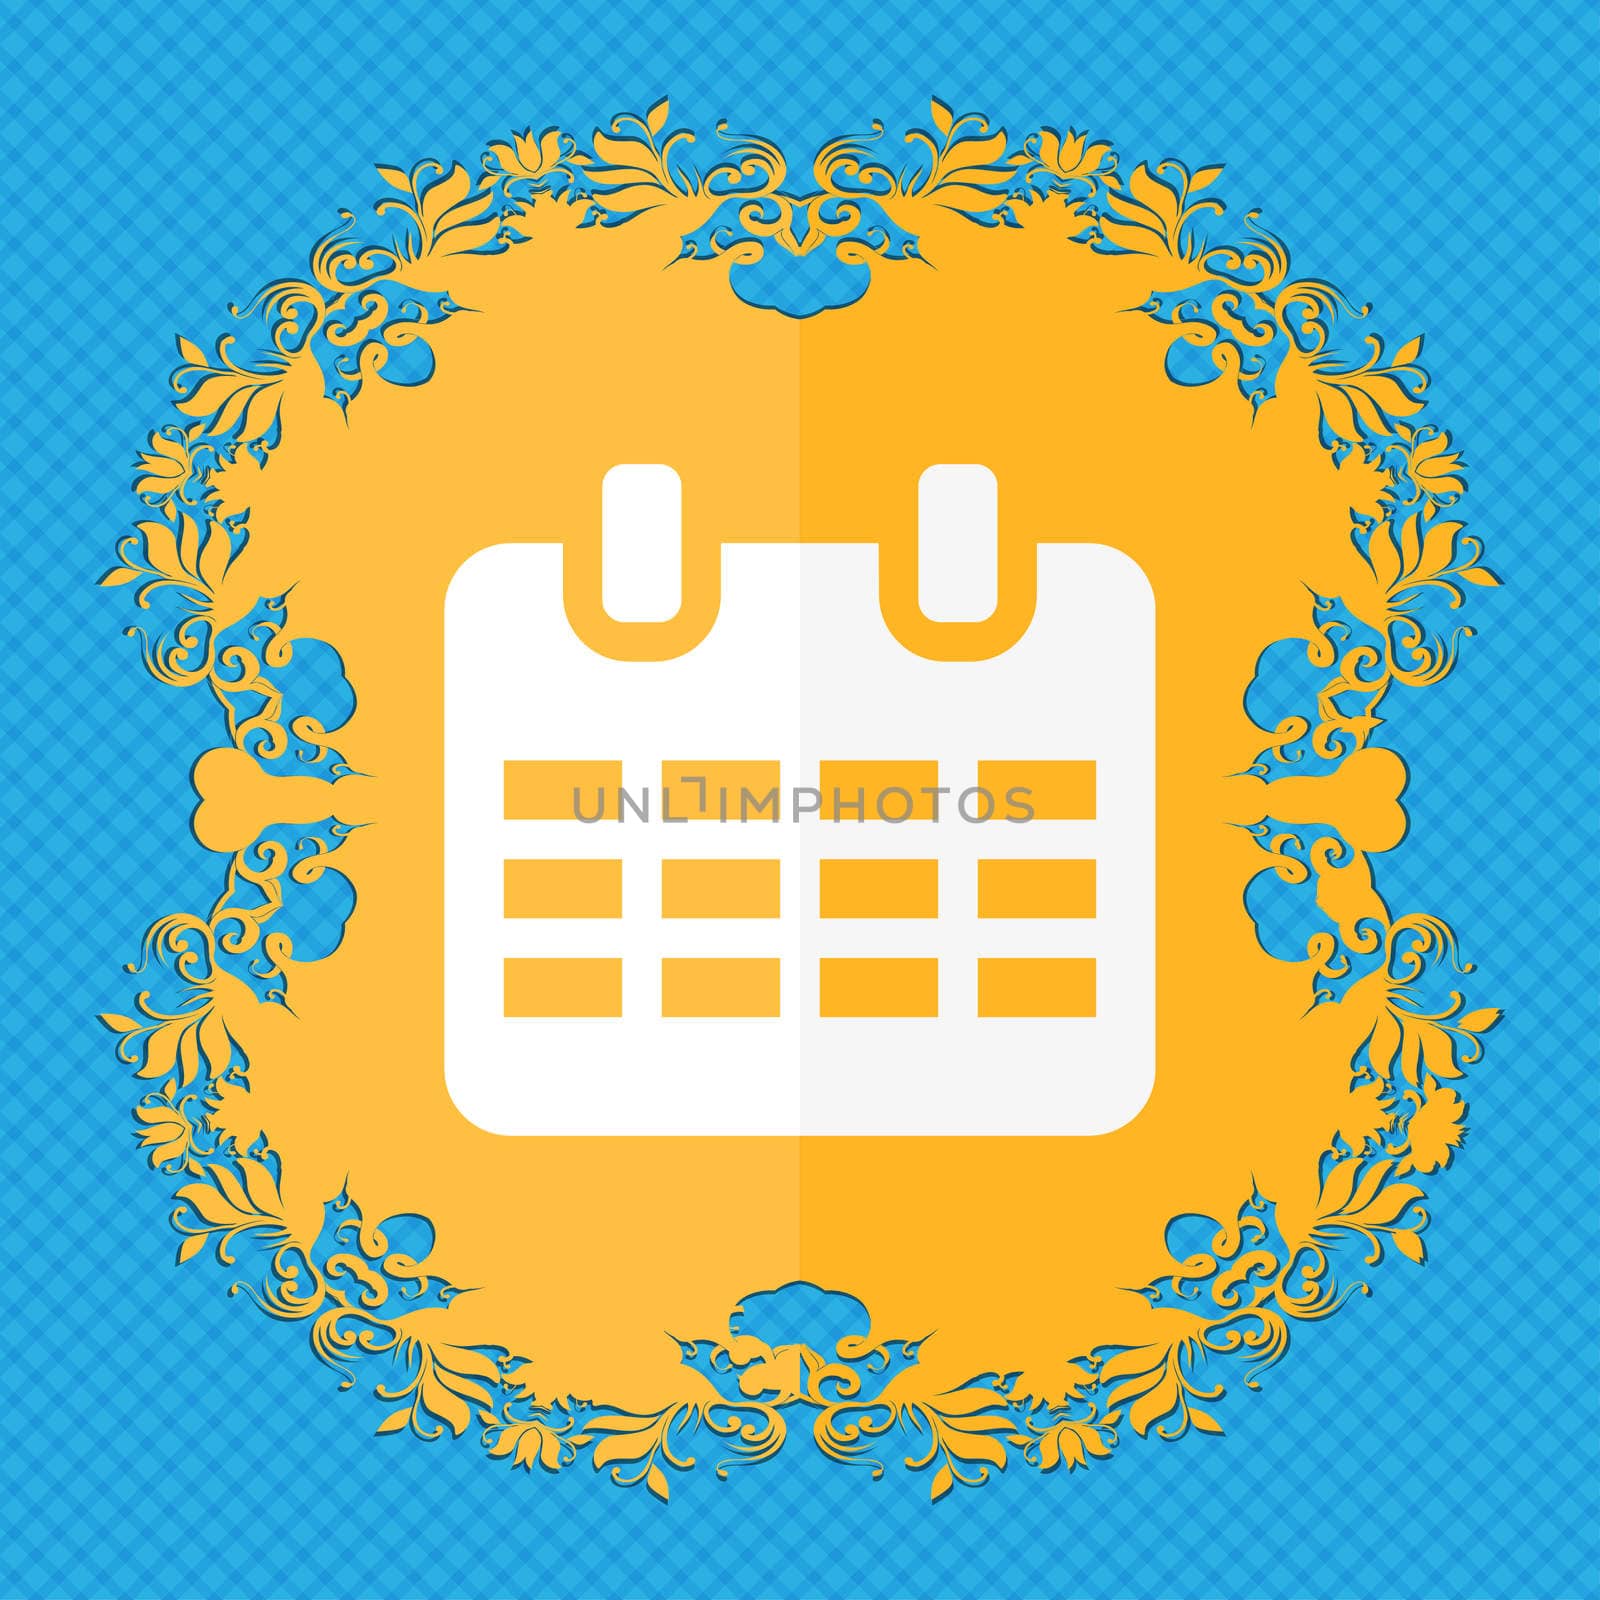  Calendar, Date or event reminder . Floral flat design on a blue abstract background with place for your text. illustration